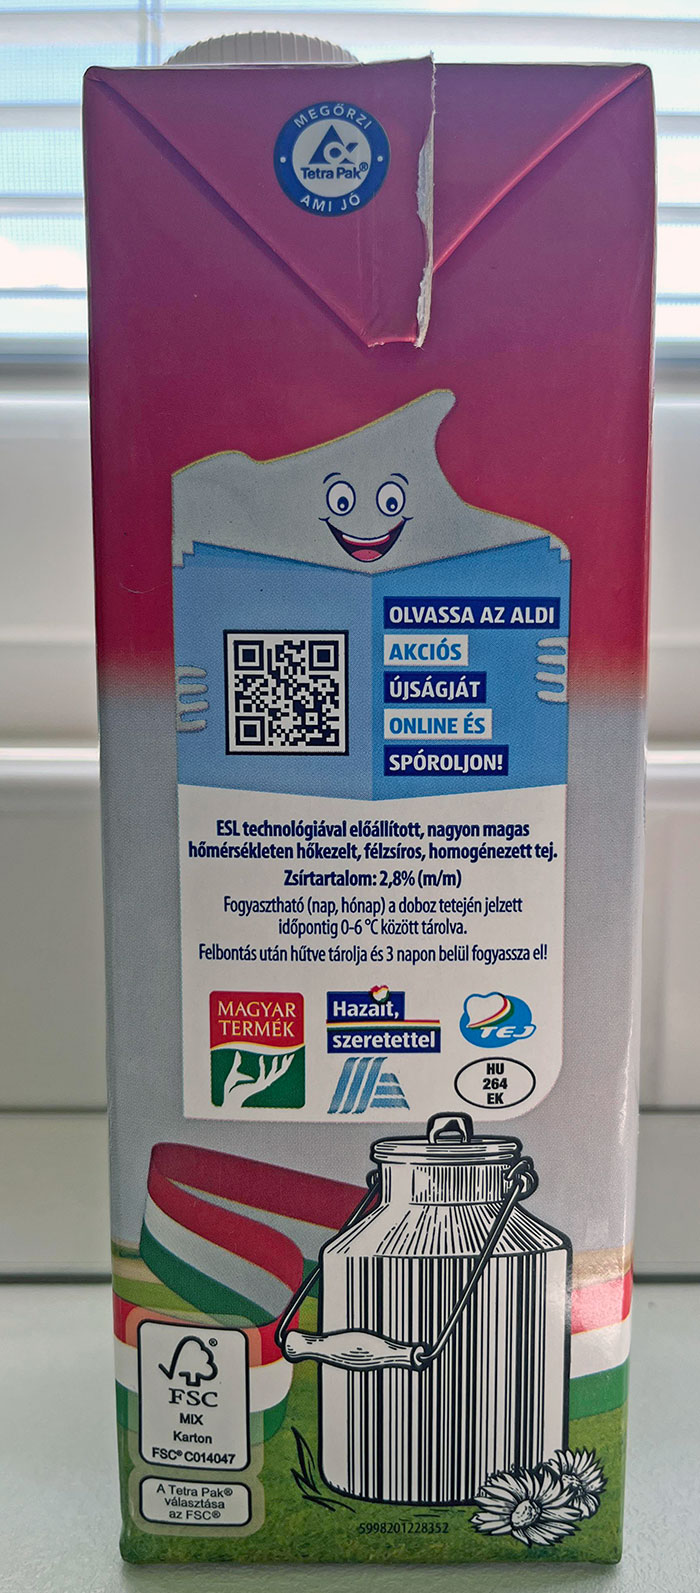 The Barcode Is Part Of The Design Of The Milk Carton